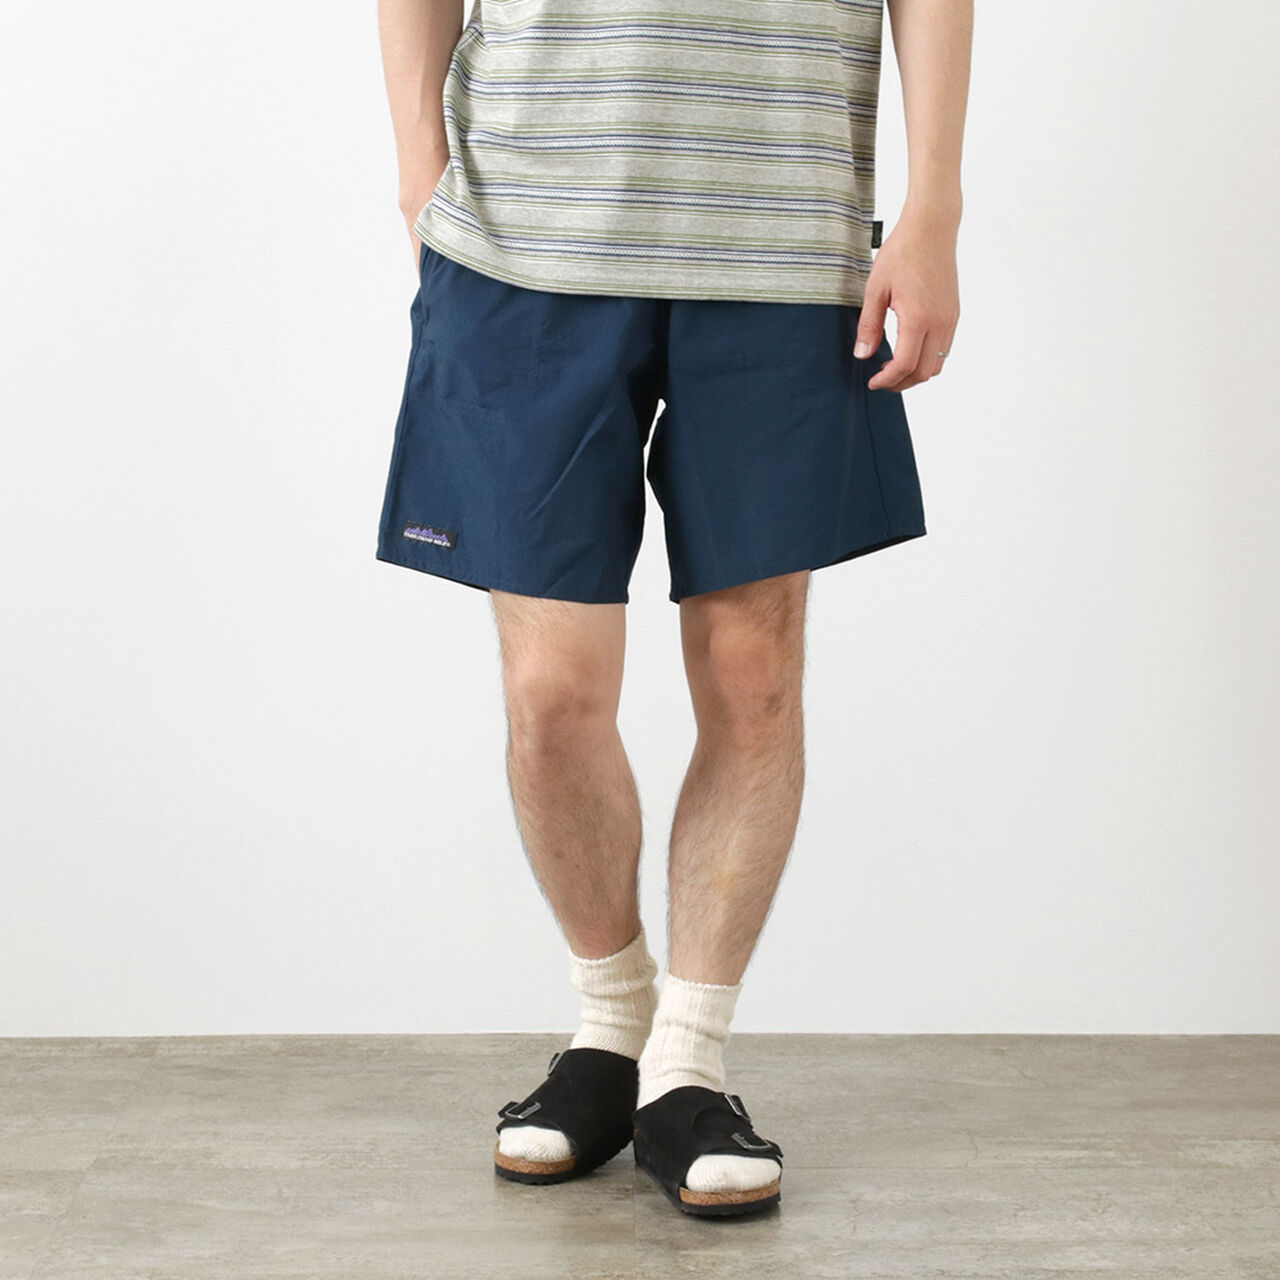 Imperial Trunk Shorts,Navy, large image number 0